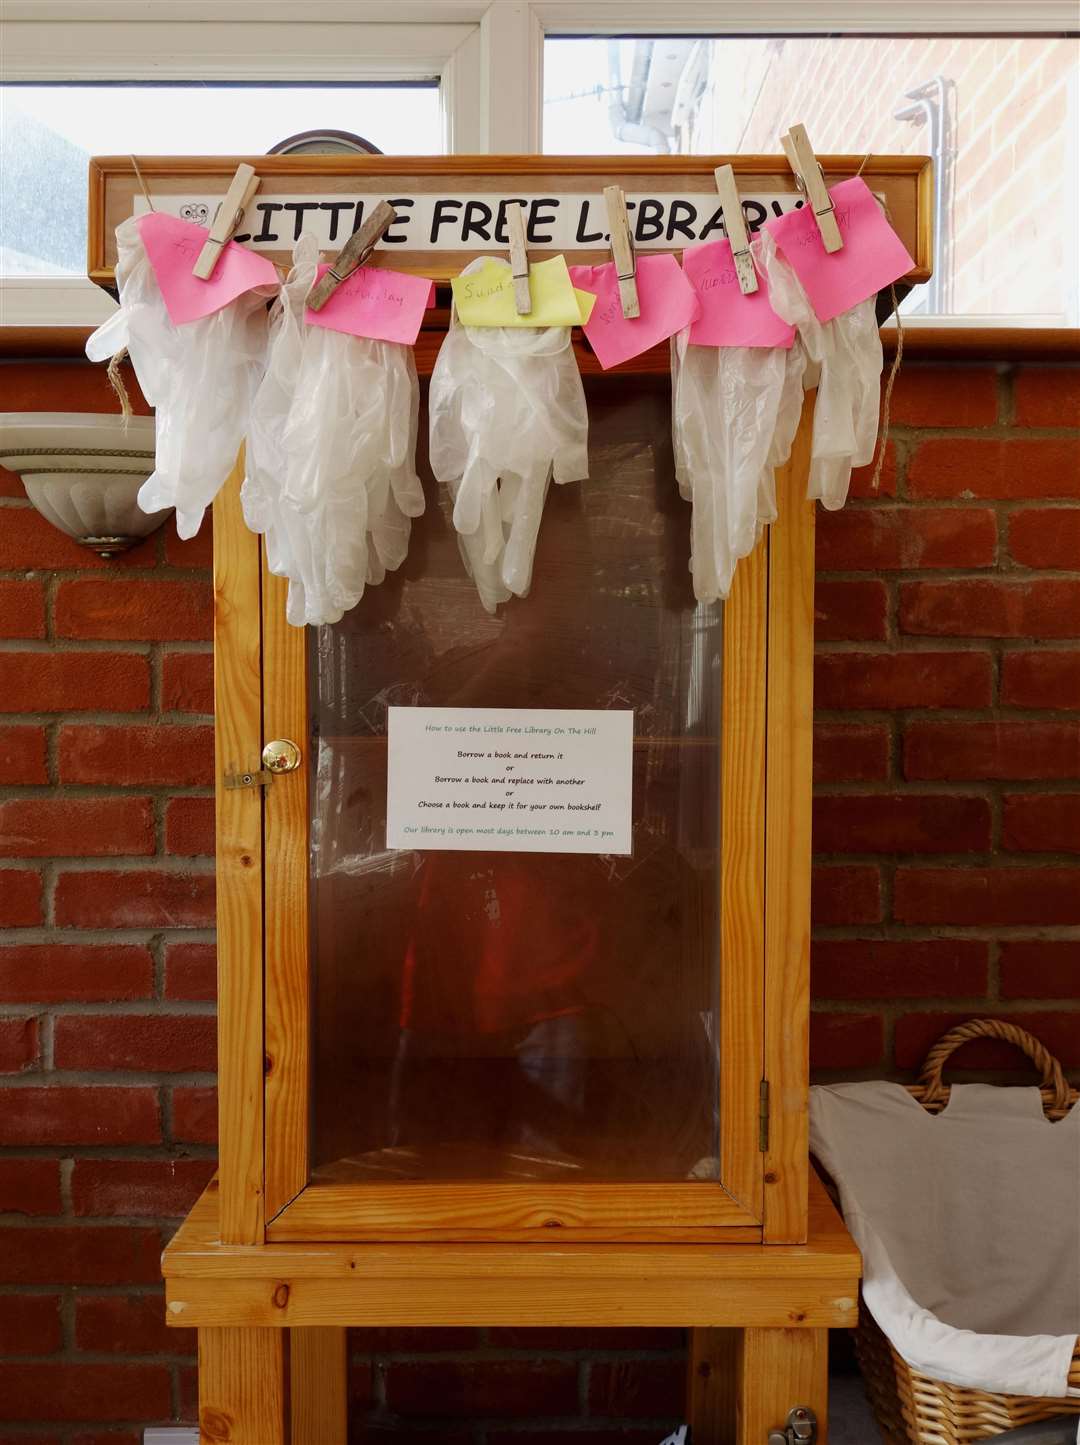 The Little Free Library on the Hill, which washes and distributes vinyl gloves, in Norwich, Norfolk, taken by Peter Offord (Peter Offord/Historic England/PA)